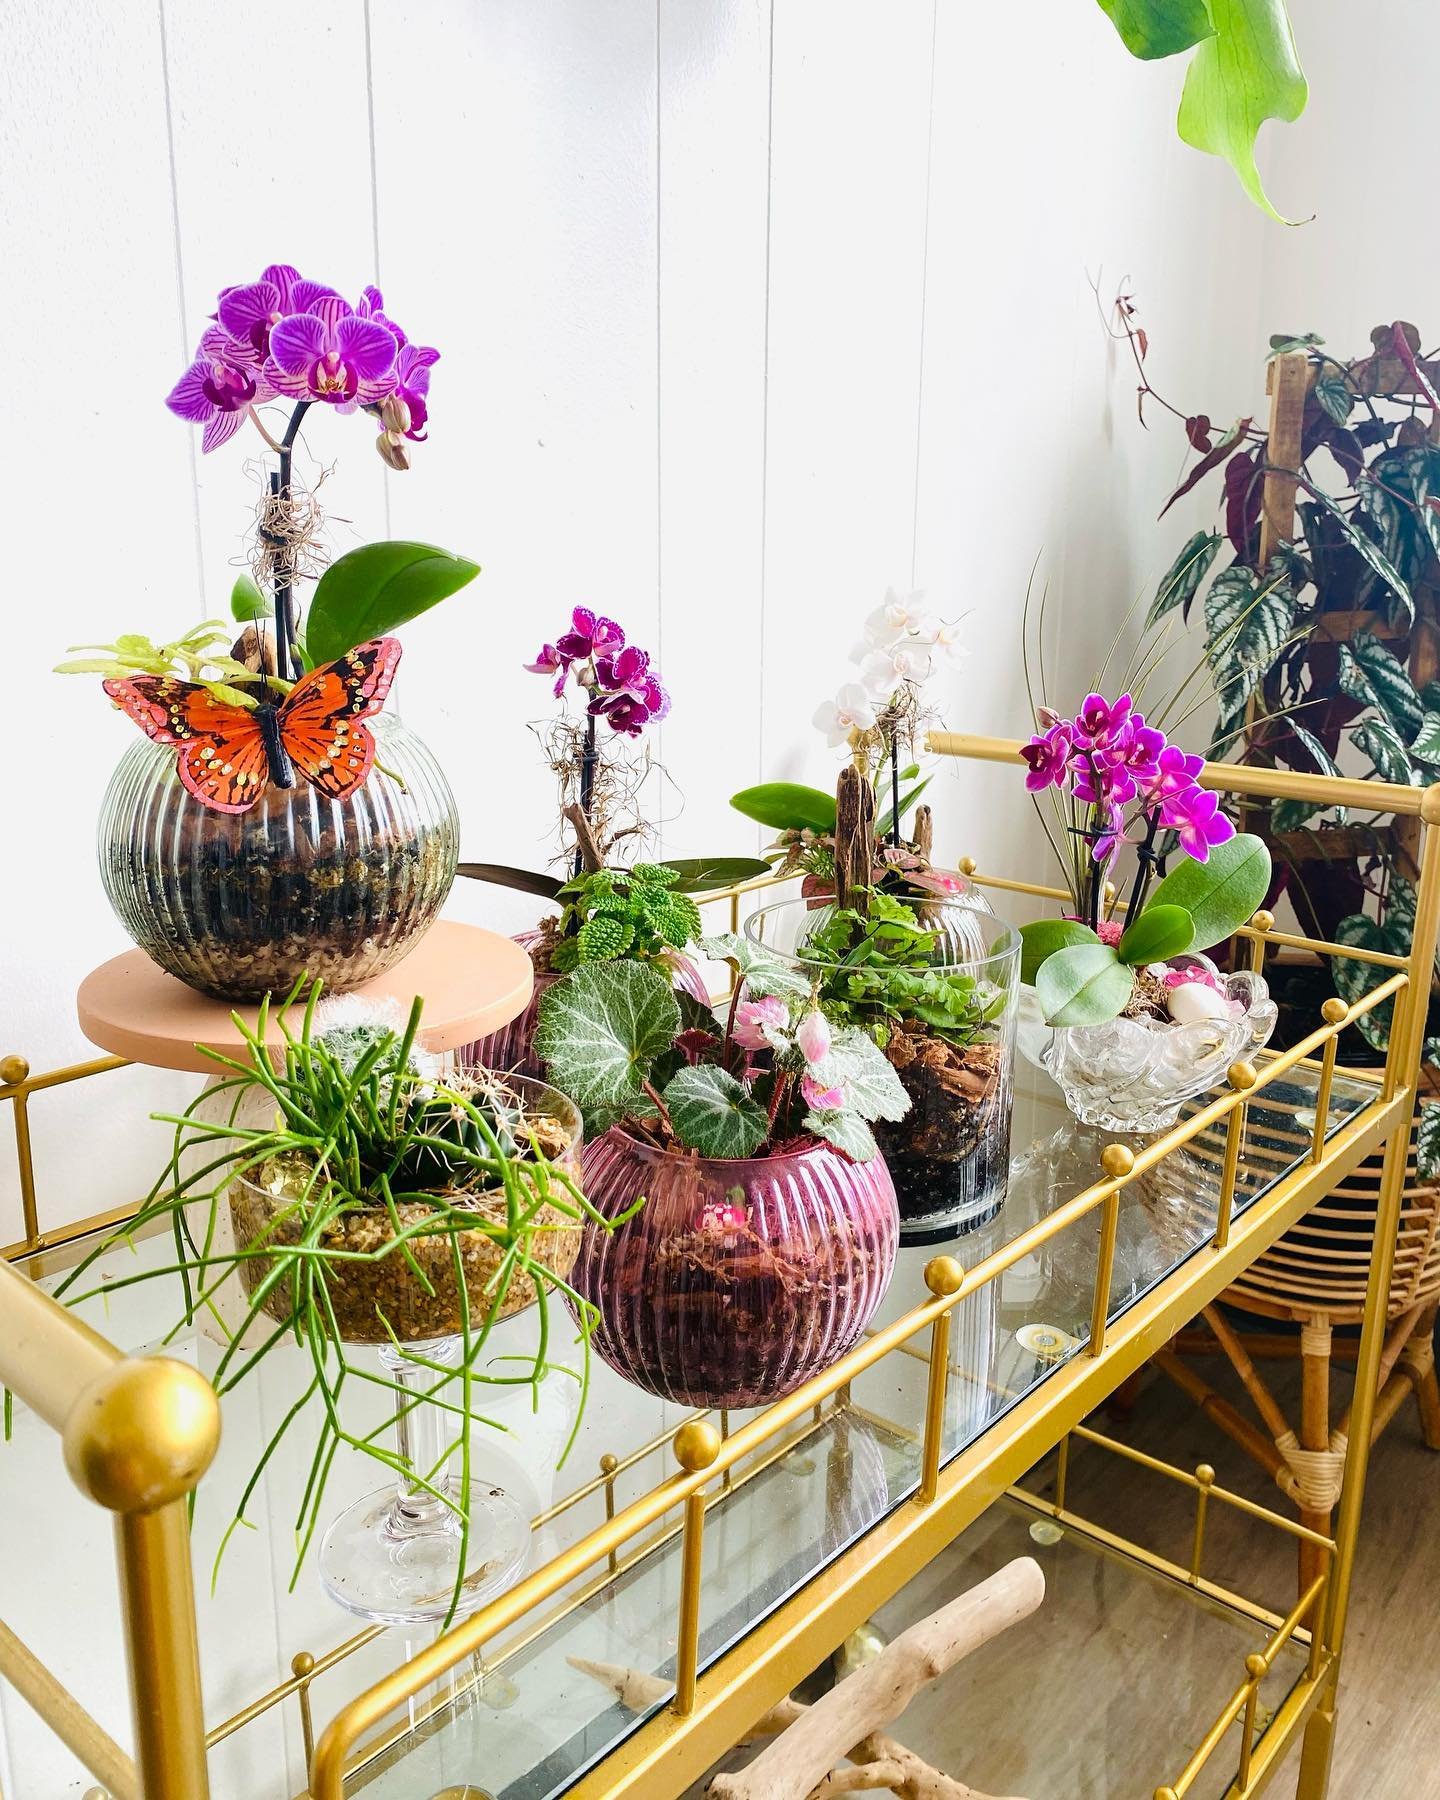 Celebrate Mother&rsquo;s Day at our plant bar Sunday 5/12 , 11am - 5pm. Reservations are encouraged for this special event. See link in bio 💚

Sip n&rsquo; Make terrariums with mom or come make a special handmade gift.

Premade plant arrangements wi